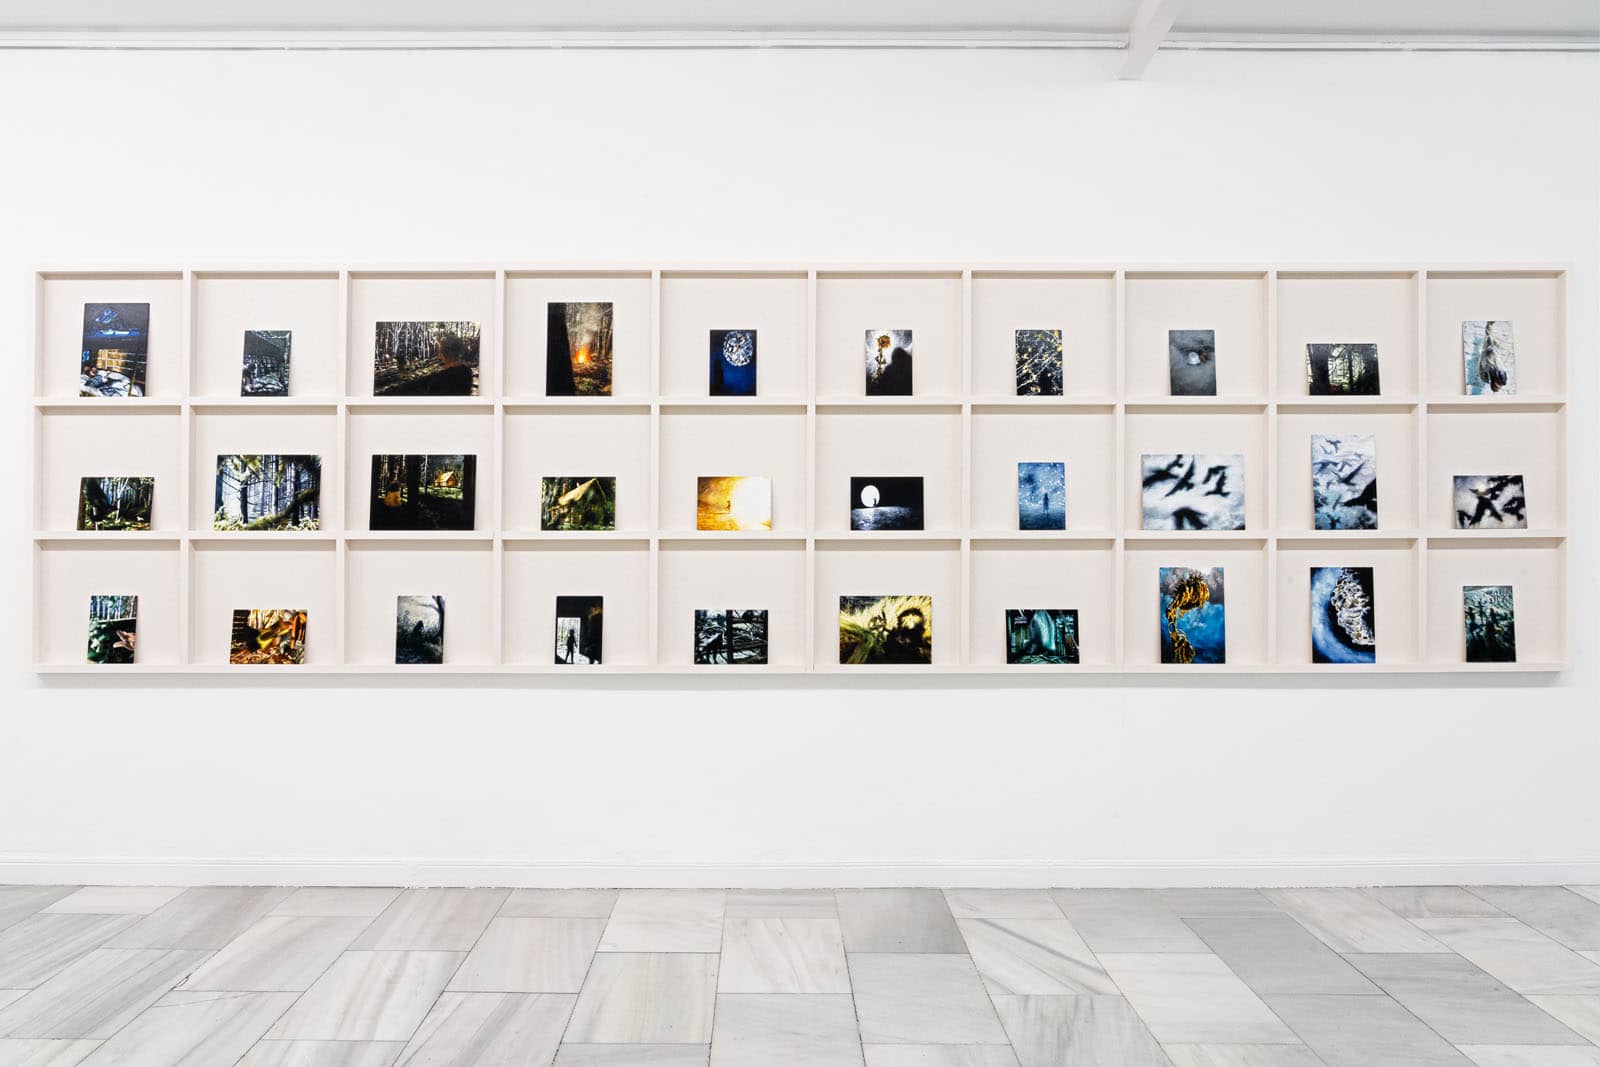 Exhibition view of the solo show "Falada" by Philipp Fröhlich at Juana de Aizpuru gallery in Spain, 2022. The image shows a shelf with 32 small scale oil sketches on panel at the gallery.